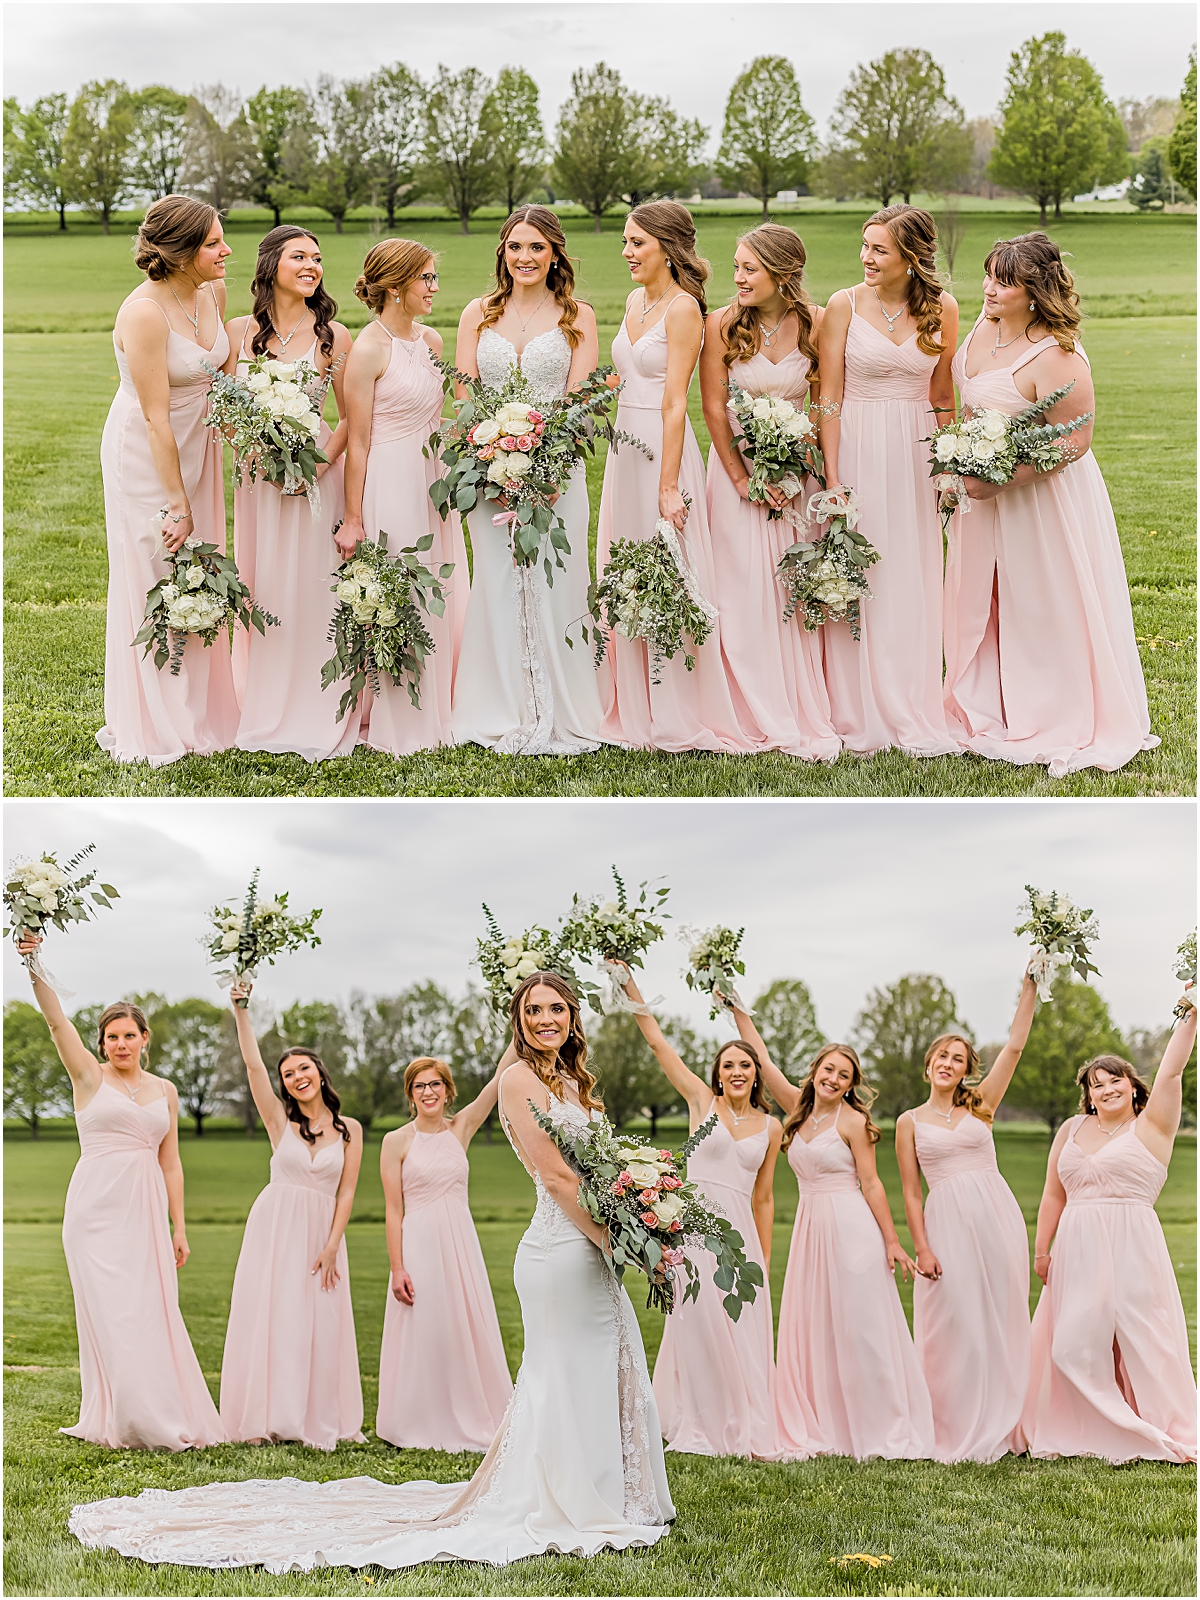 Ashleigh and bridesmaids holding bouquets